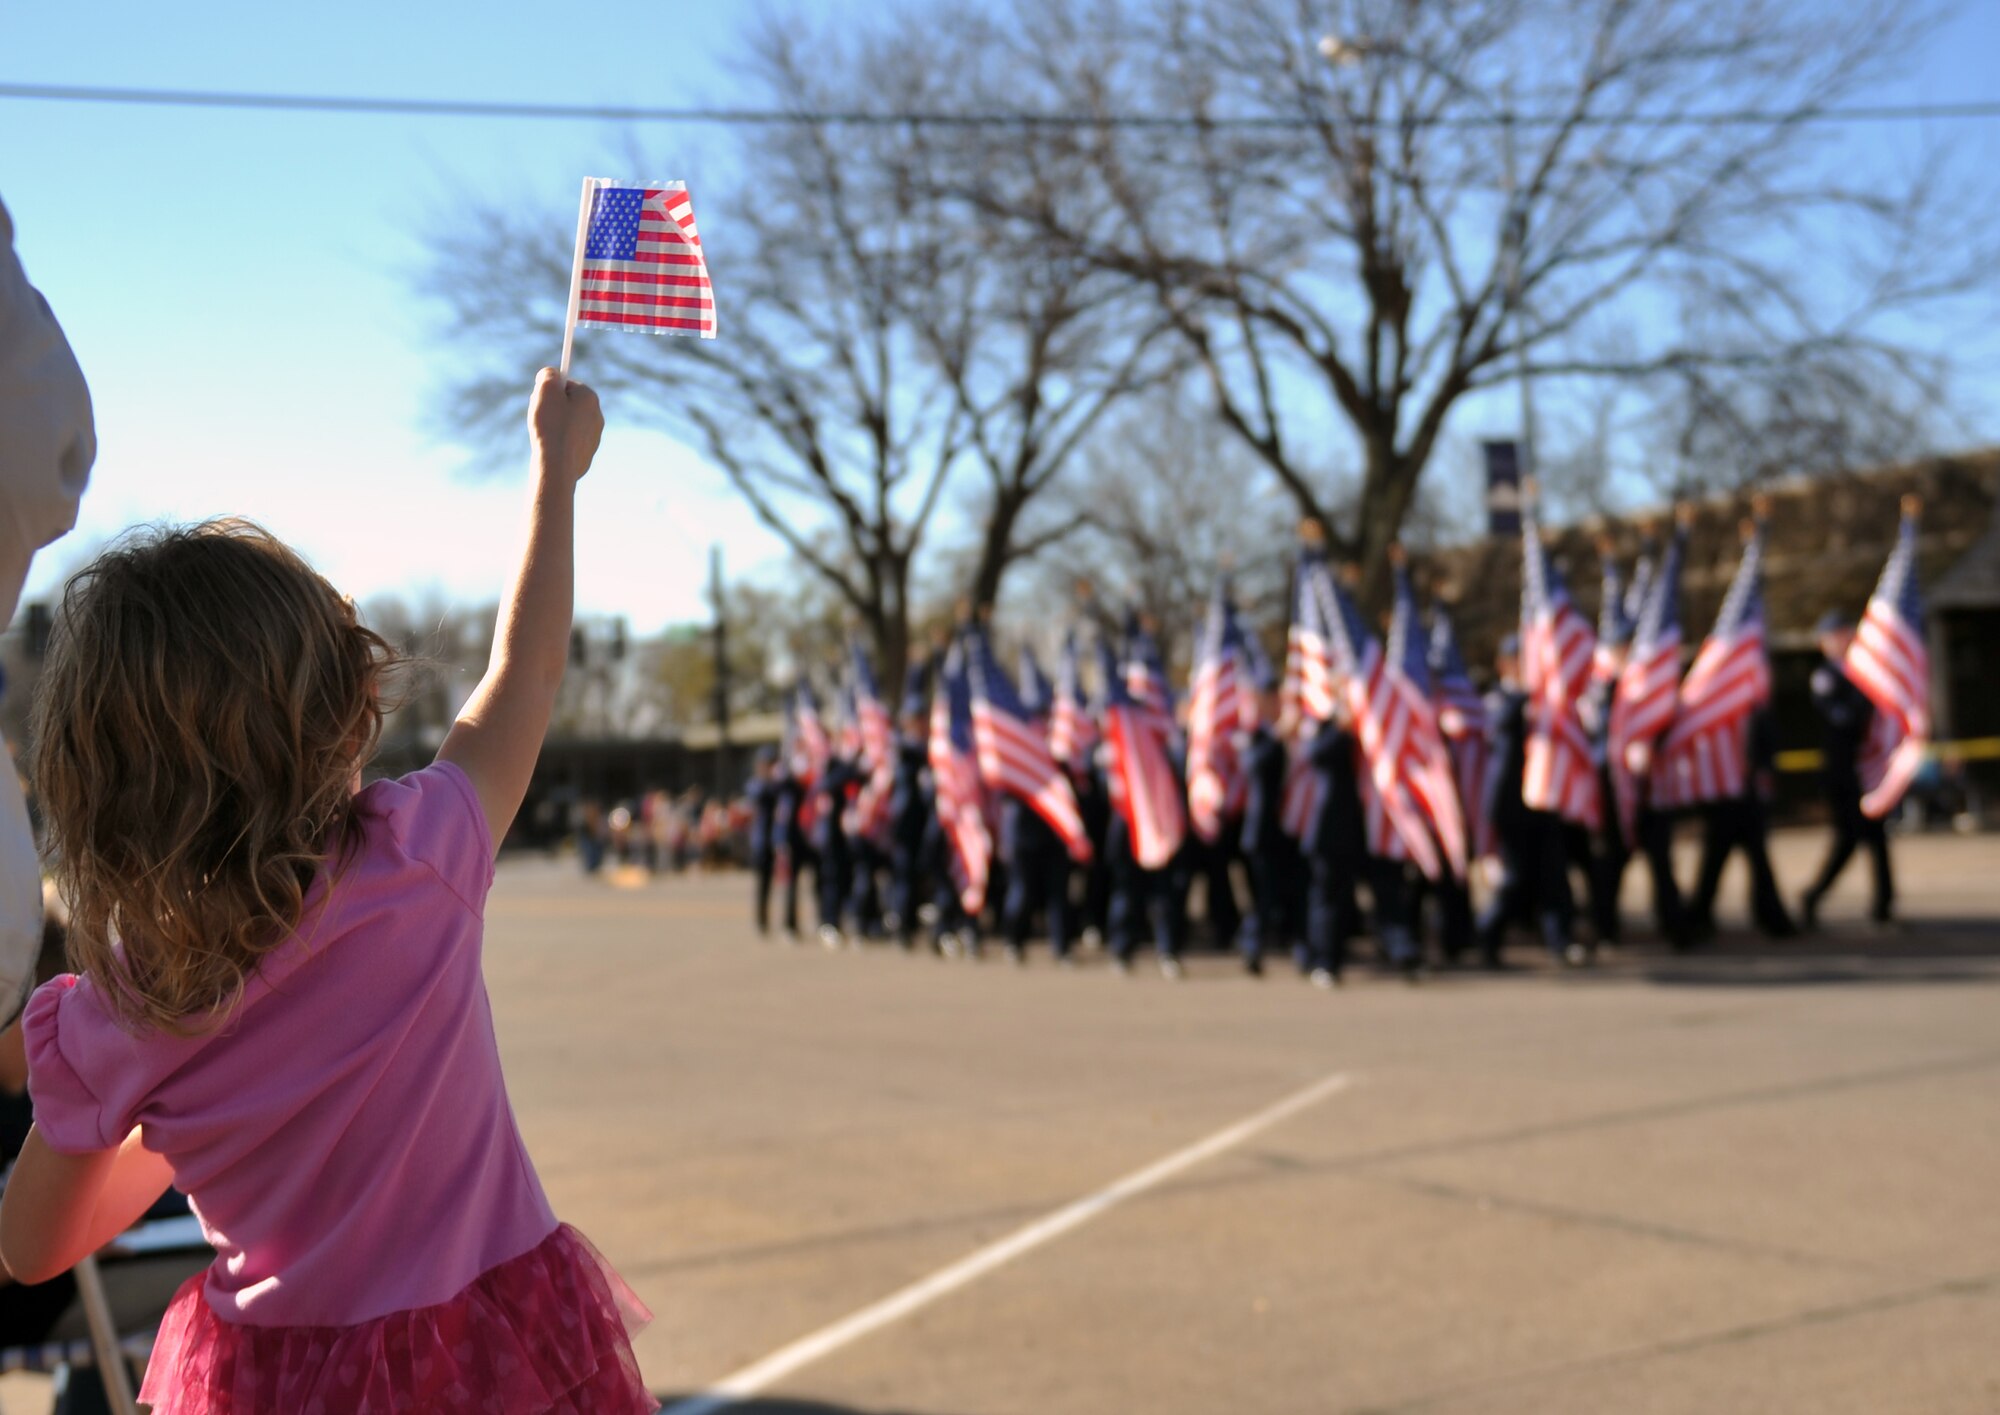 Holly Smith, daughter of U.S. Air Force Master Sgt. Raymond Taylor, 55th Medical Support Squadron, holds her flag up with pride as the Junior ROTC marches by in the 2012 Veterans Day parade in Bellevue, Neb. Nov. 10. Team Offutt joined with the Bellevue community to honor veterans. (U.S. Air Force photo by Jeff W. Gates/Released)